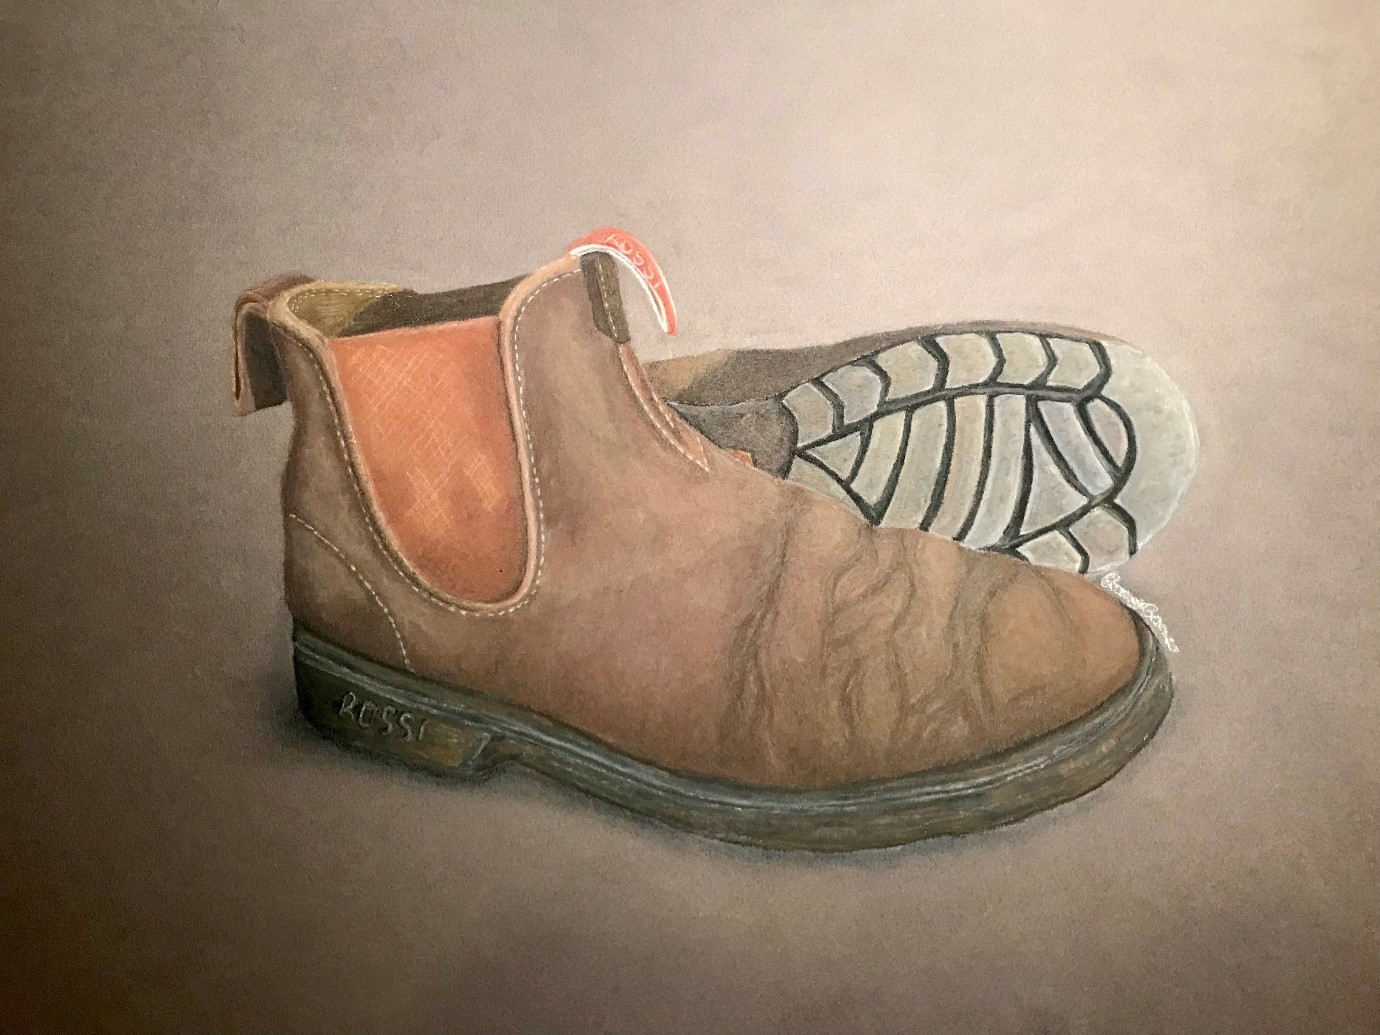 Painting of work boots